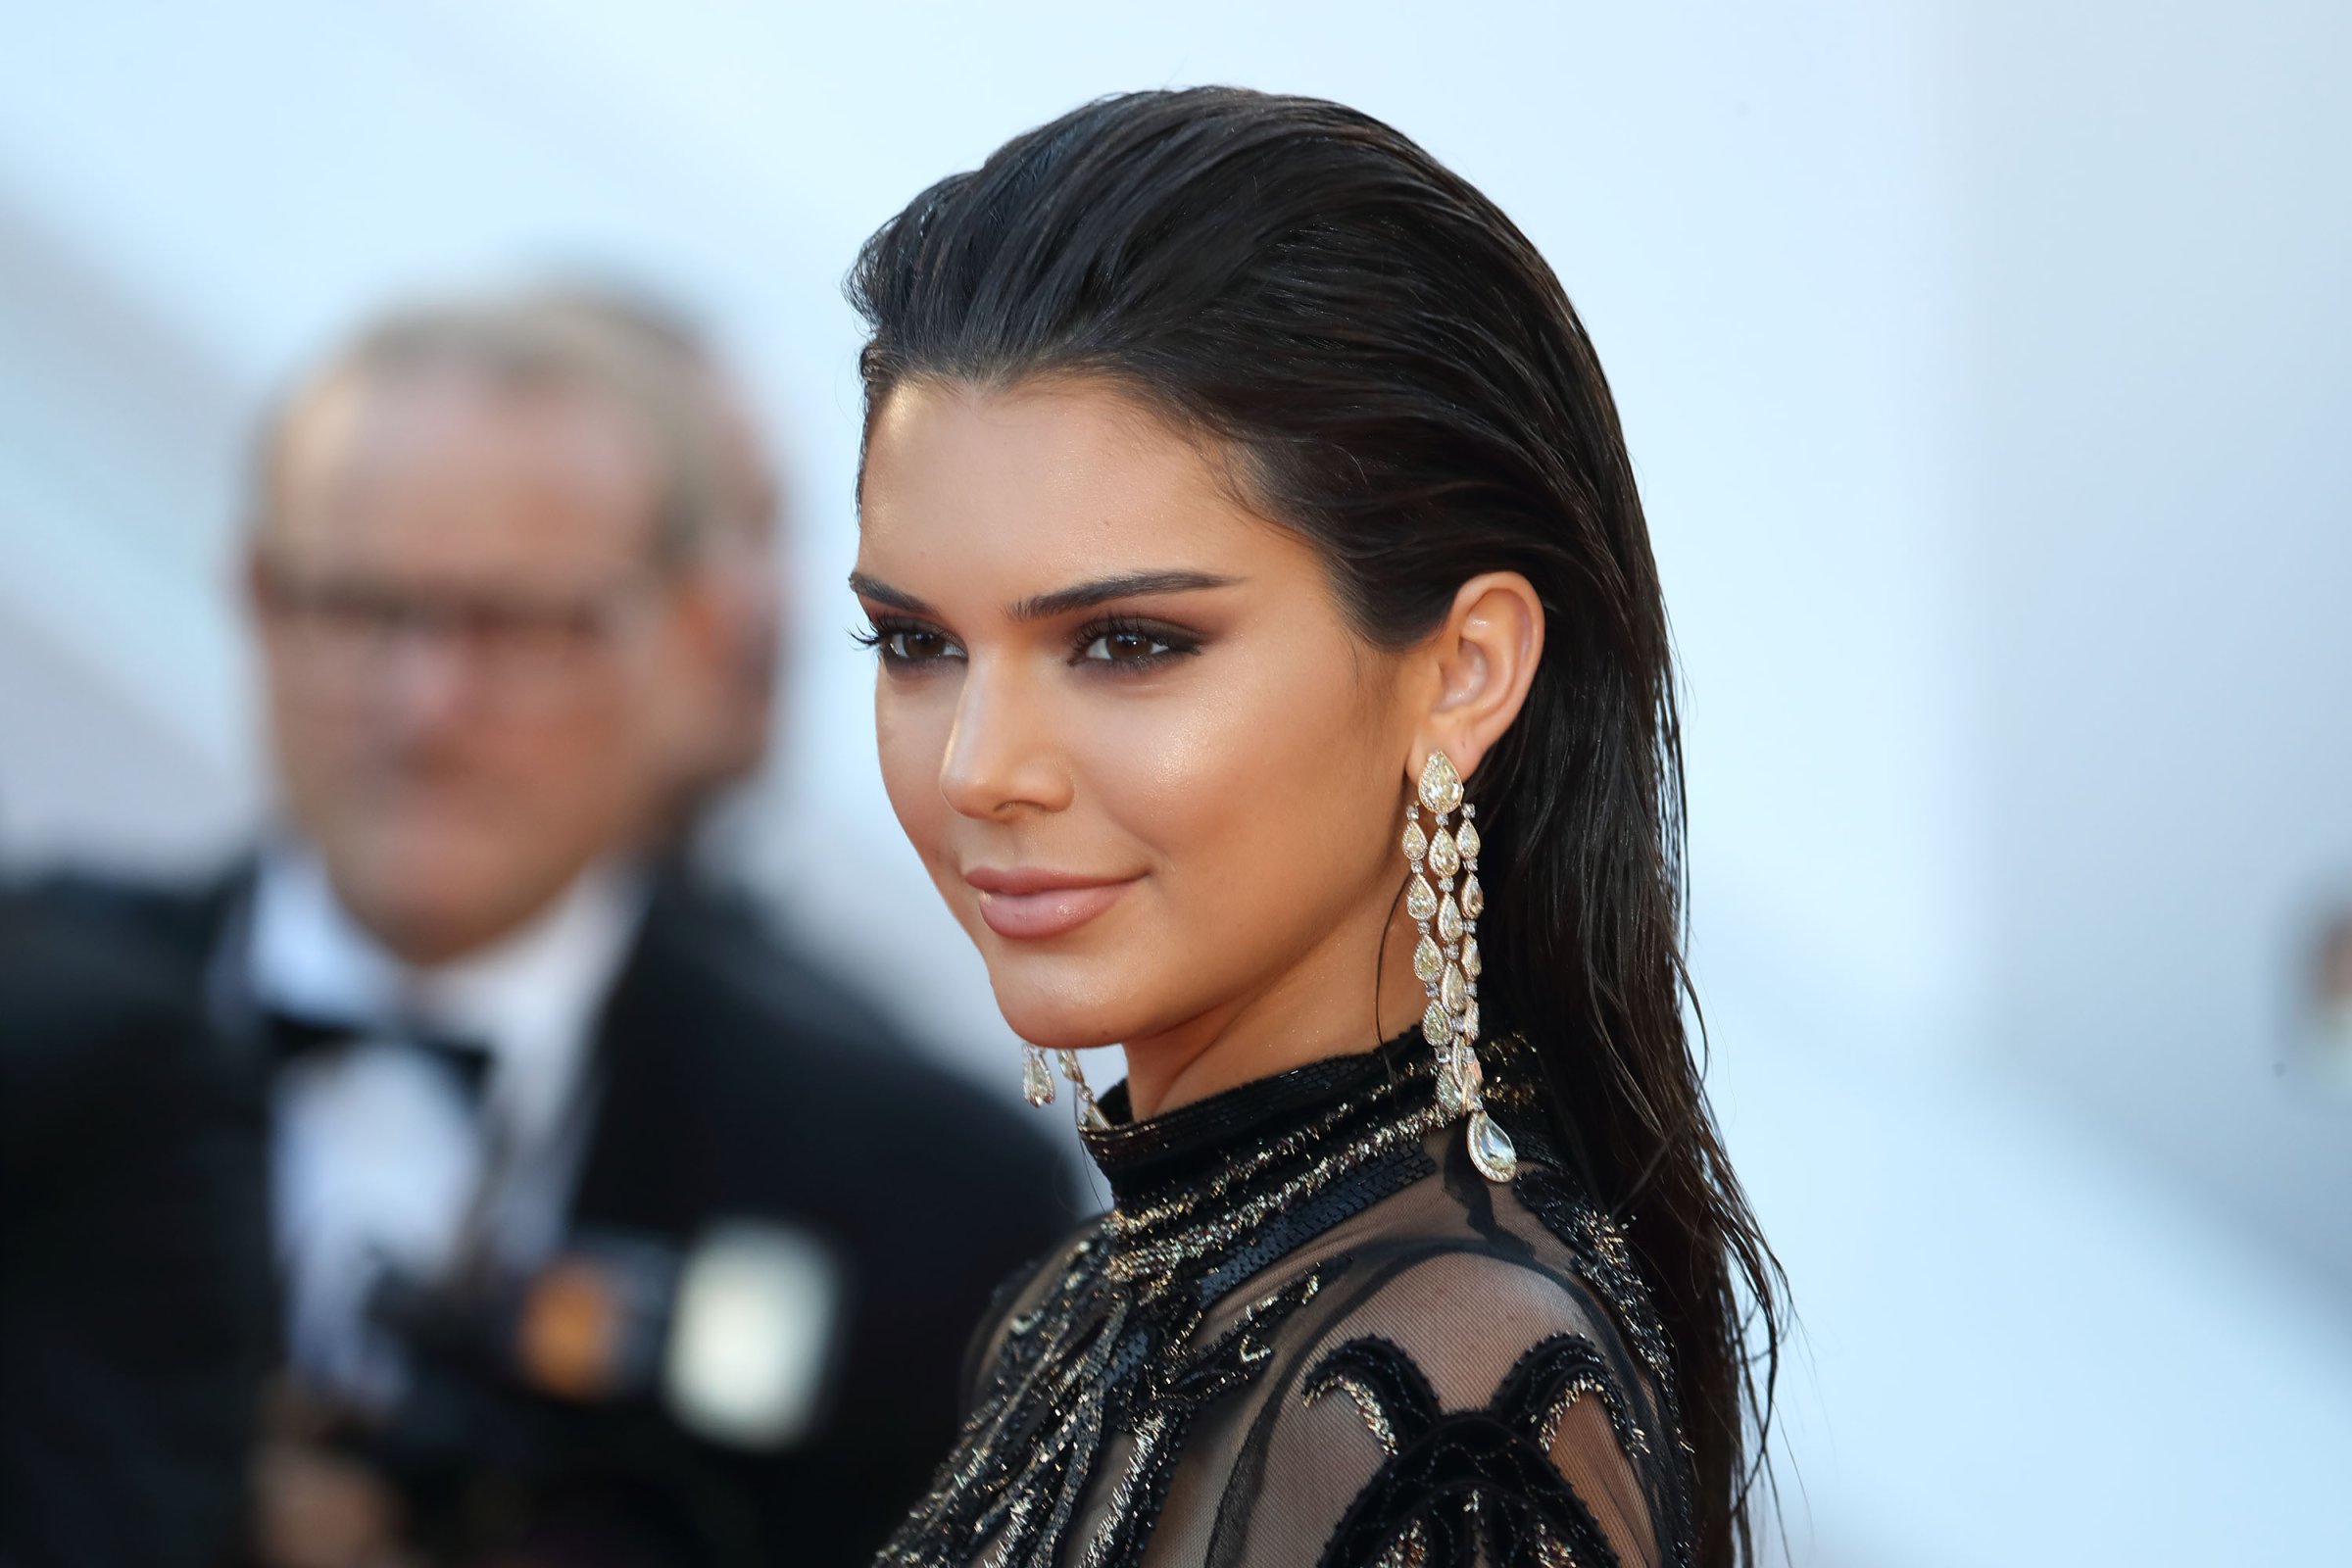 Kendall Jenner attends the "From The Land Of The Moon (Mal De Pierres)" premiere during the 69th annual Cannes Film Festival at the Palais des Festivals on May 15, 2016 in Cannes.